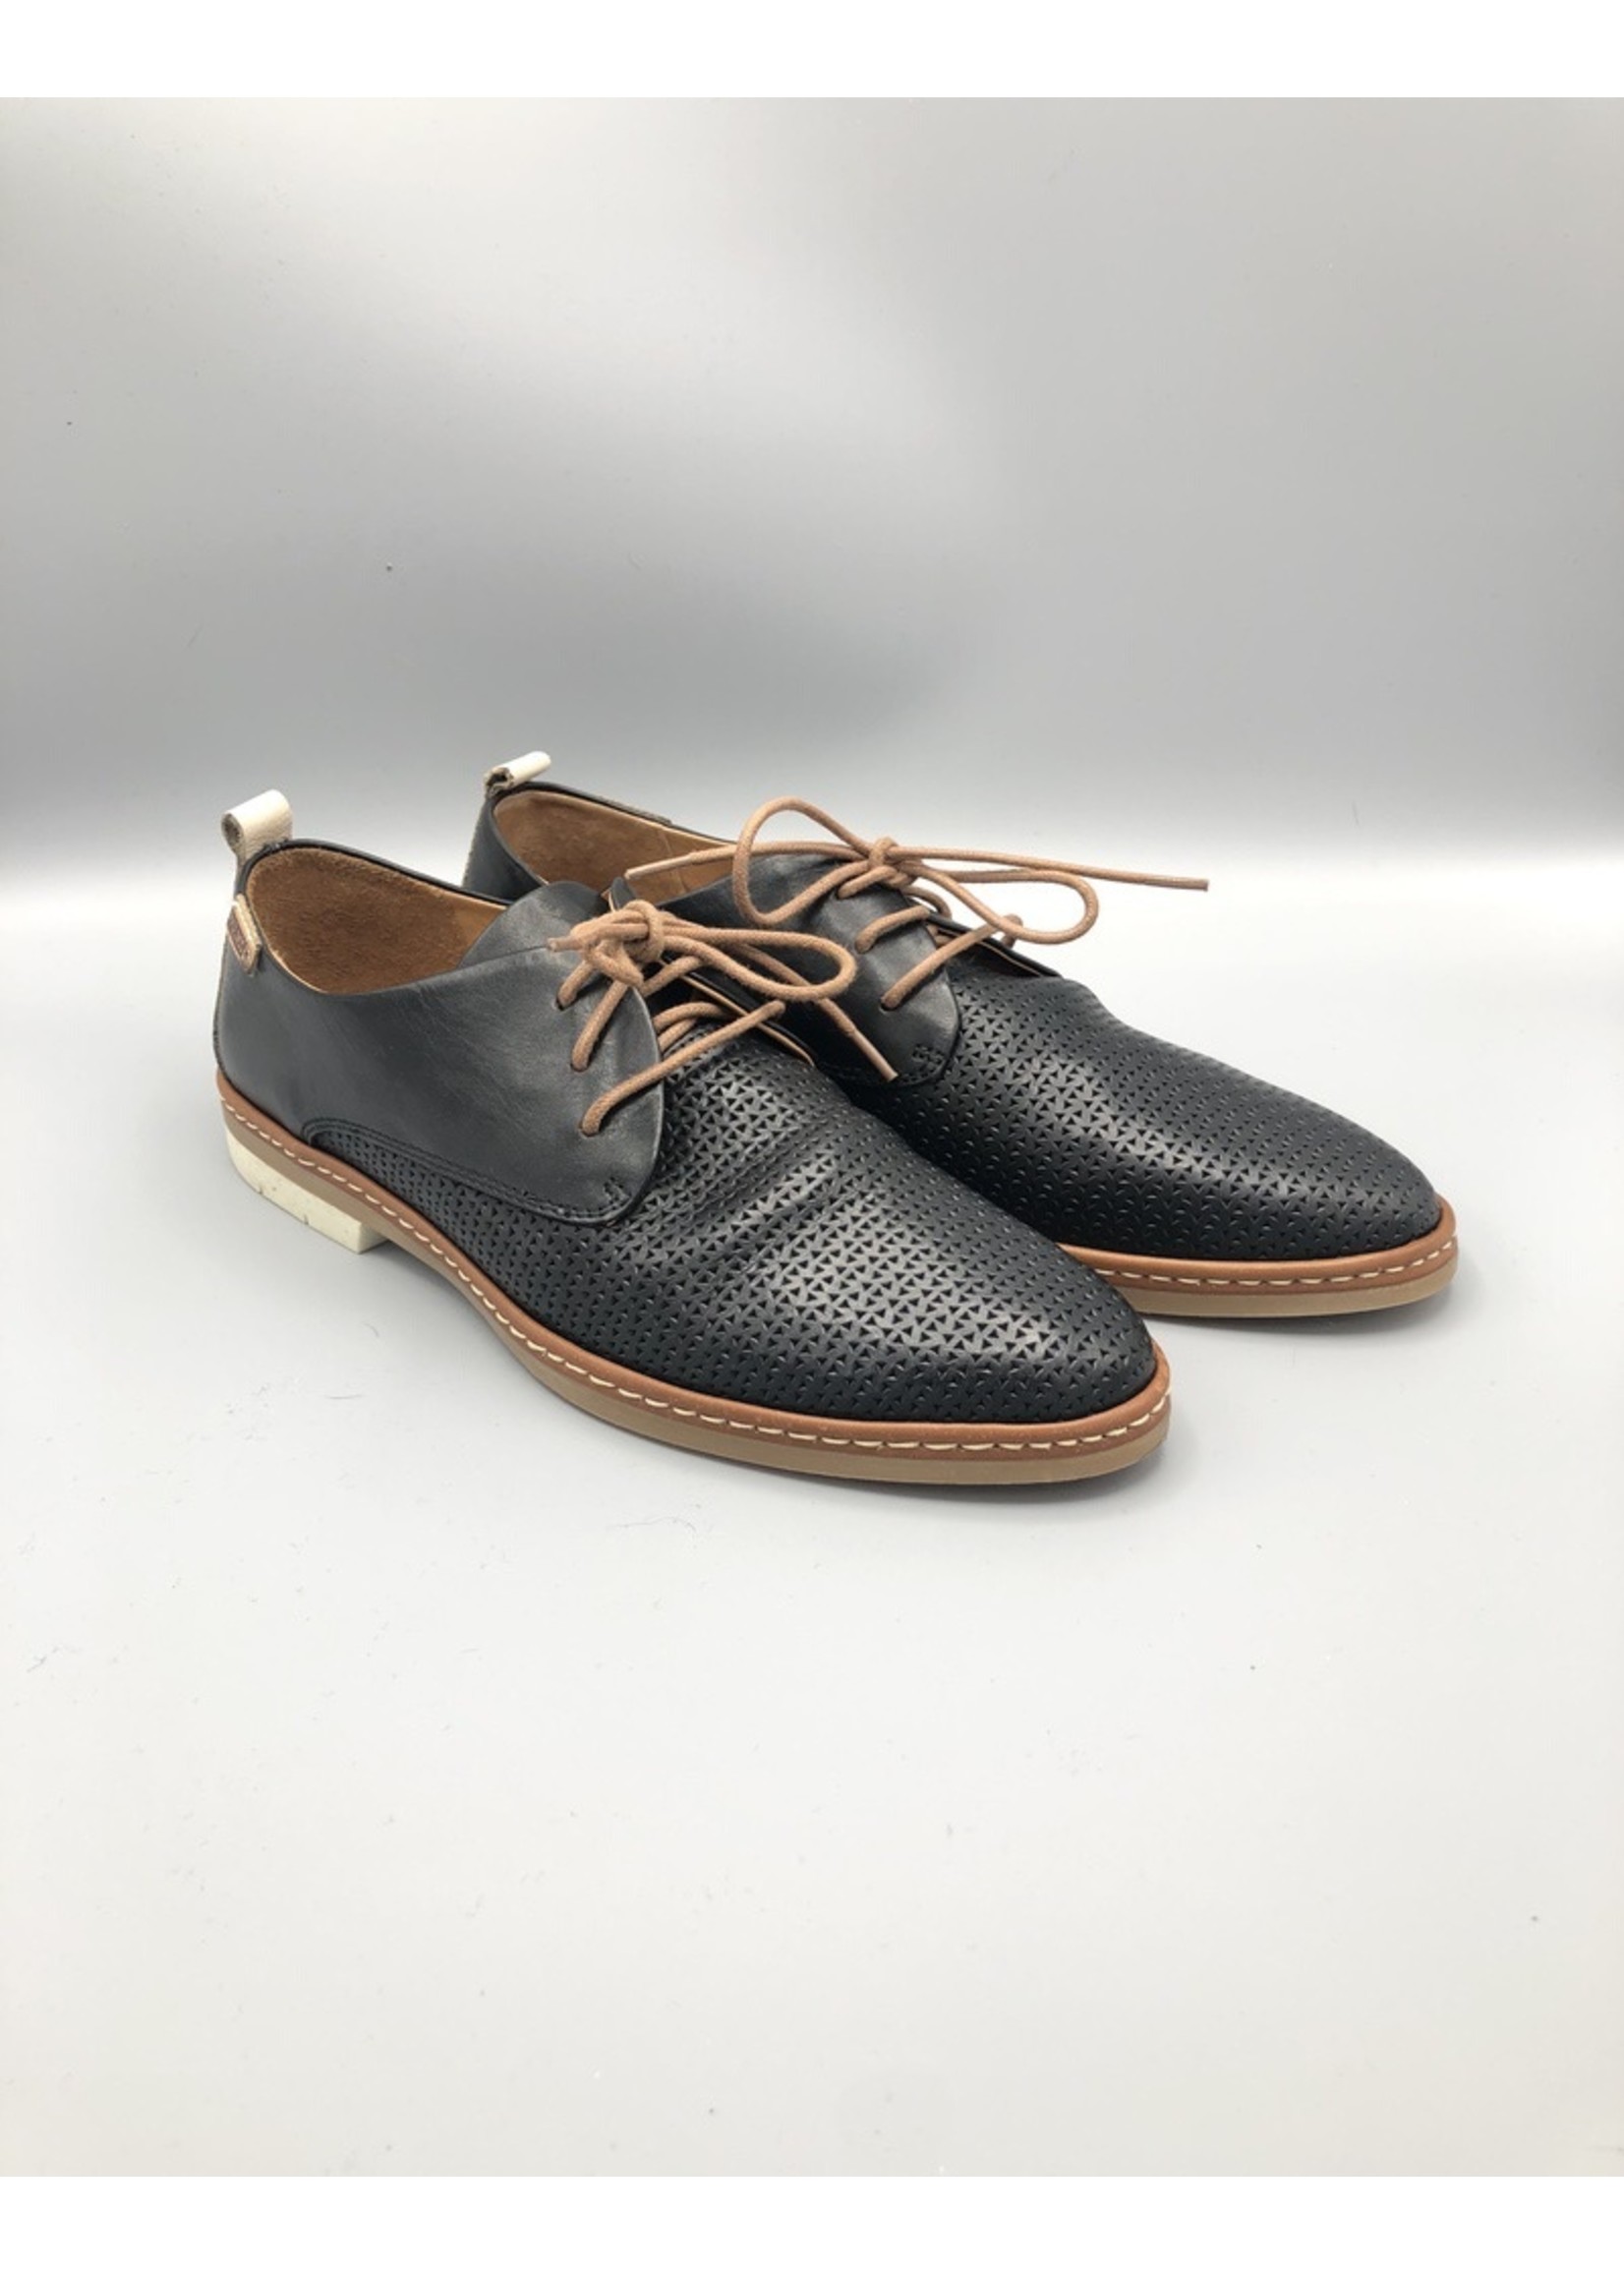 Pikolinos Pikolinos Santander Perforated Leather Lace Up Oxford